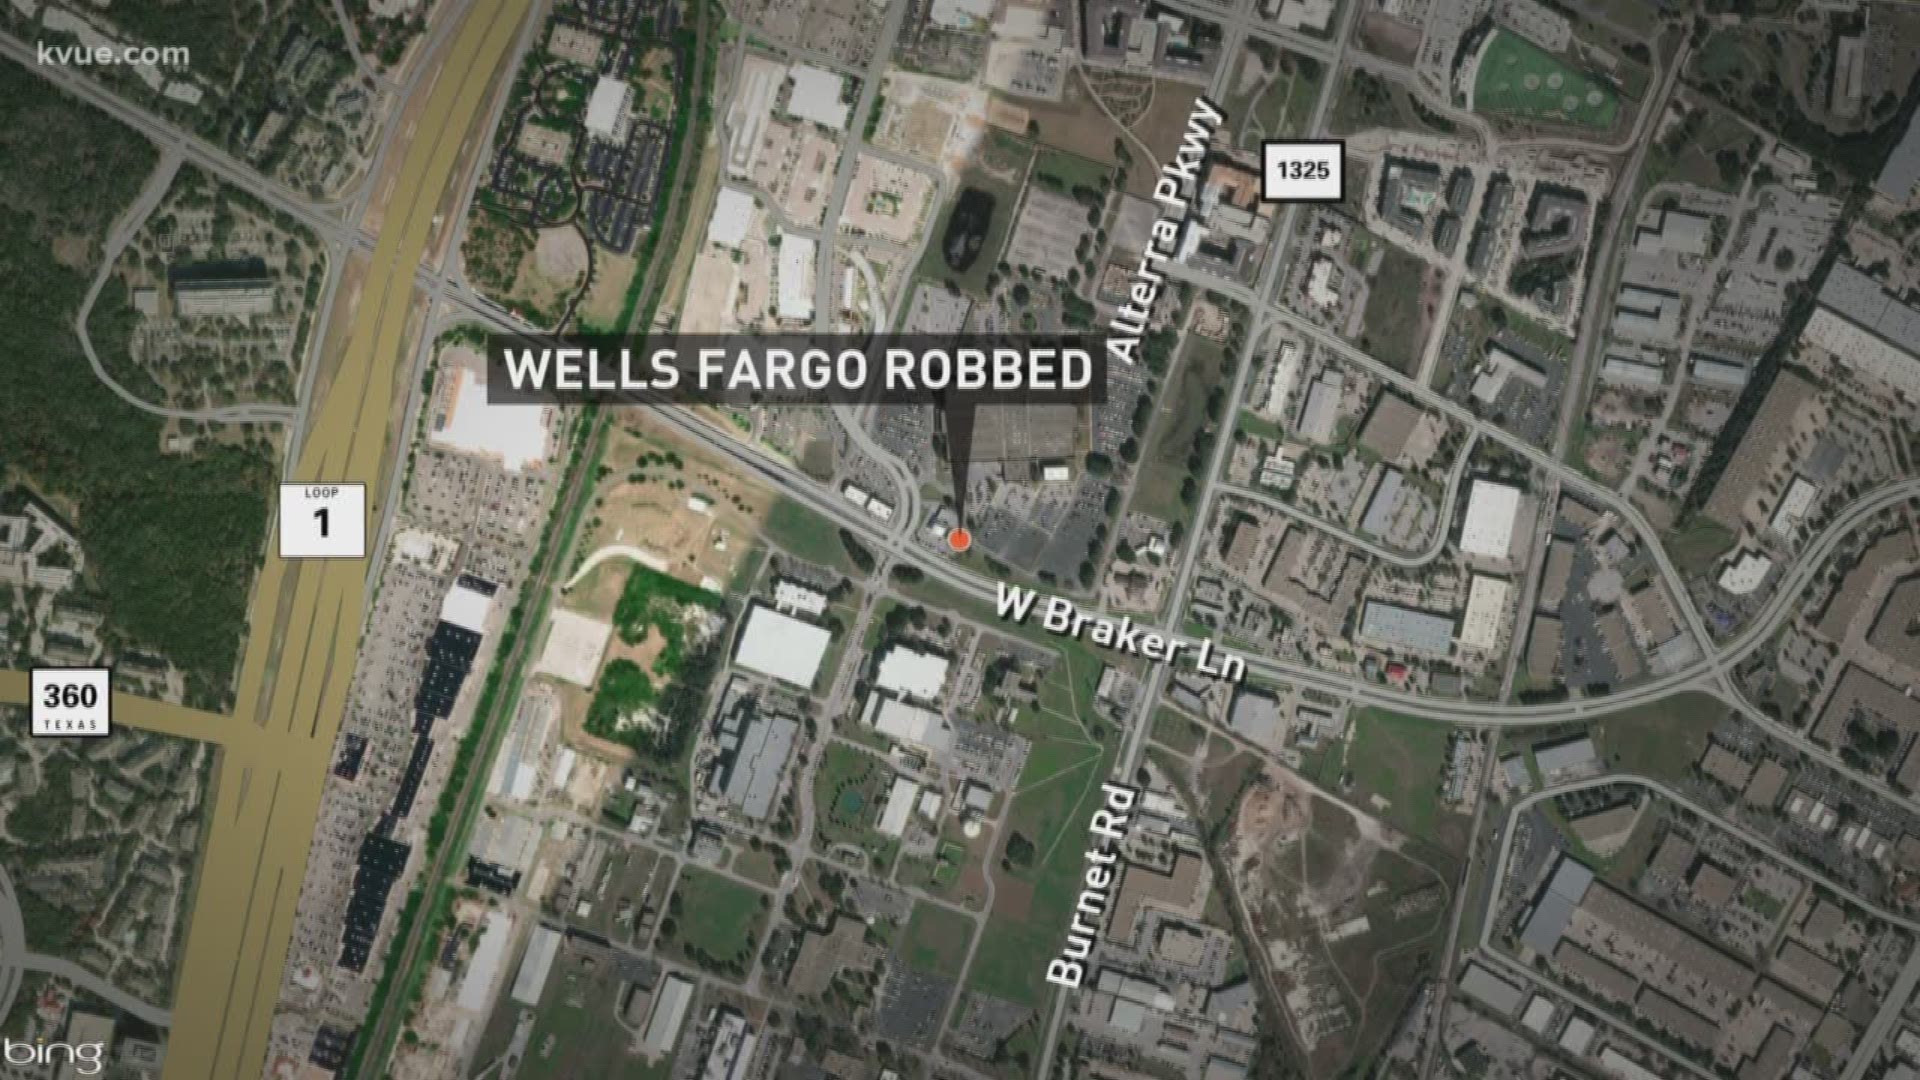 The robbery took place at 11:35 a.m. at the Wells Fargo on Braker Ln.